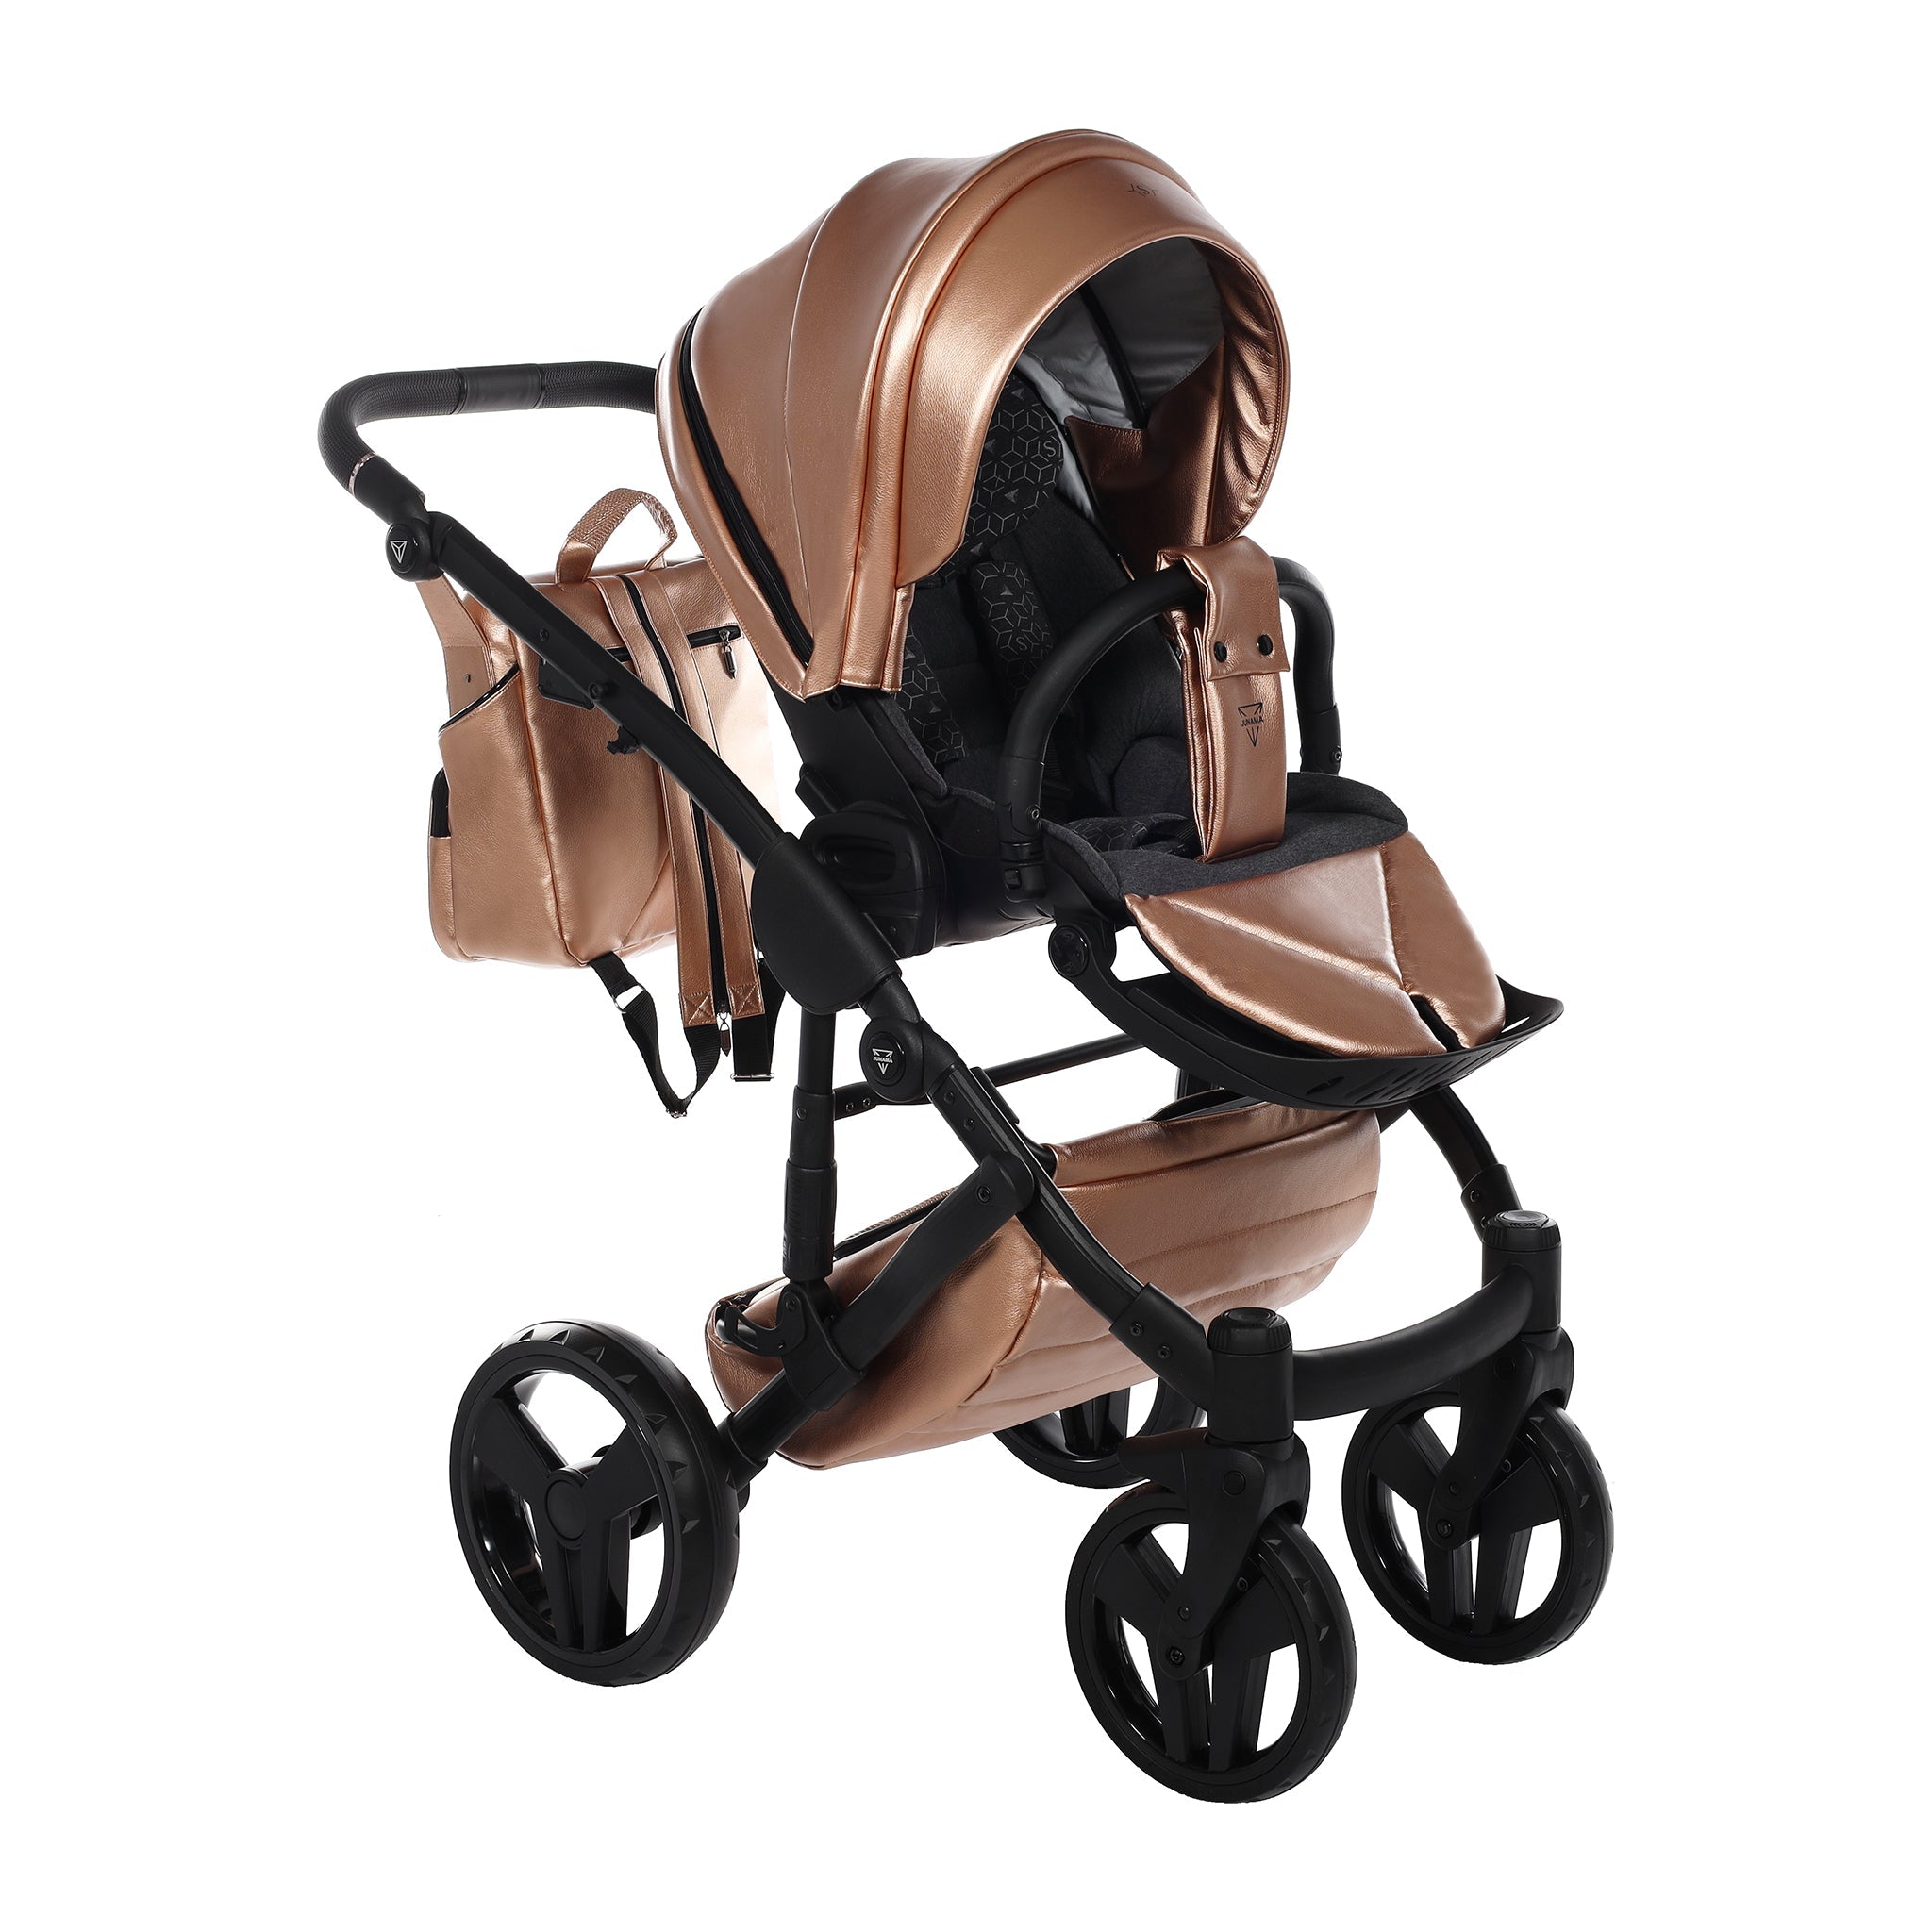 Junama S Class, baby prams or stroller 2 in 1 - Copper and Black, Code number: JUNSC05